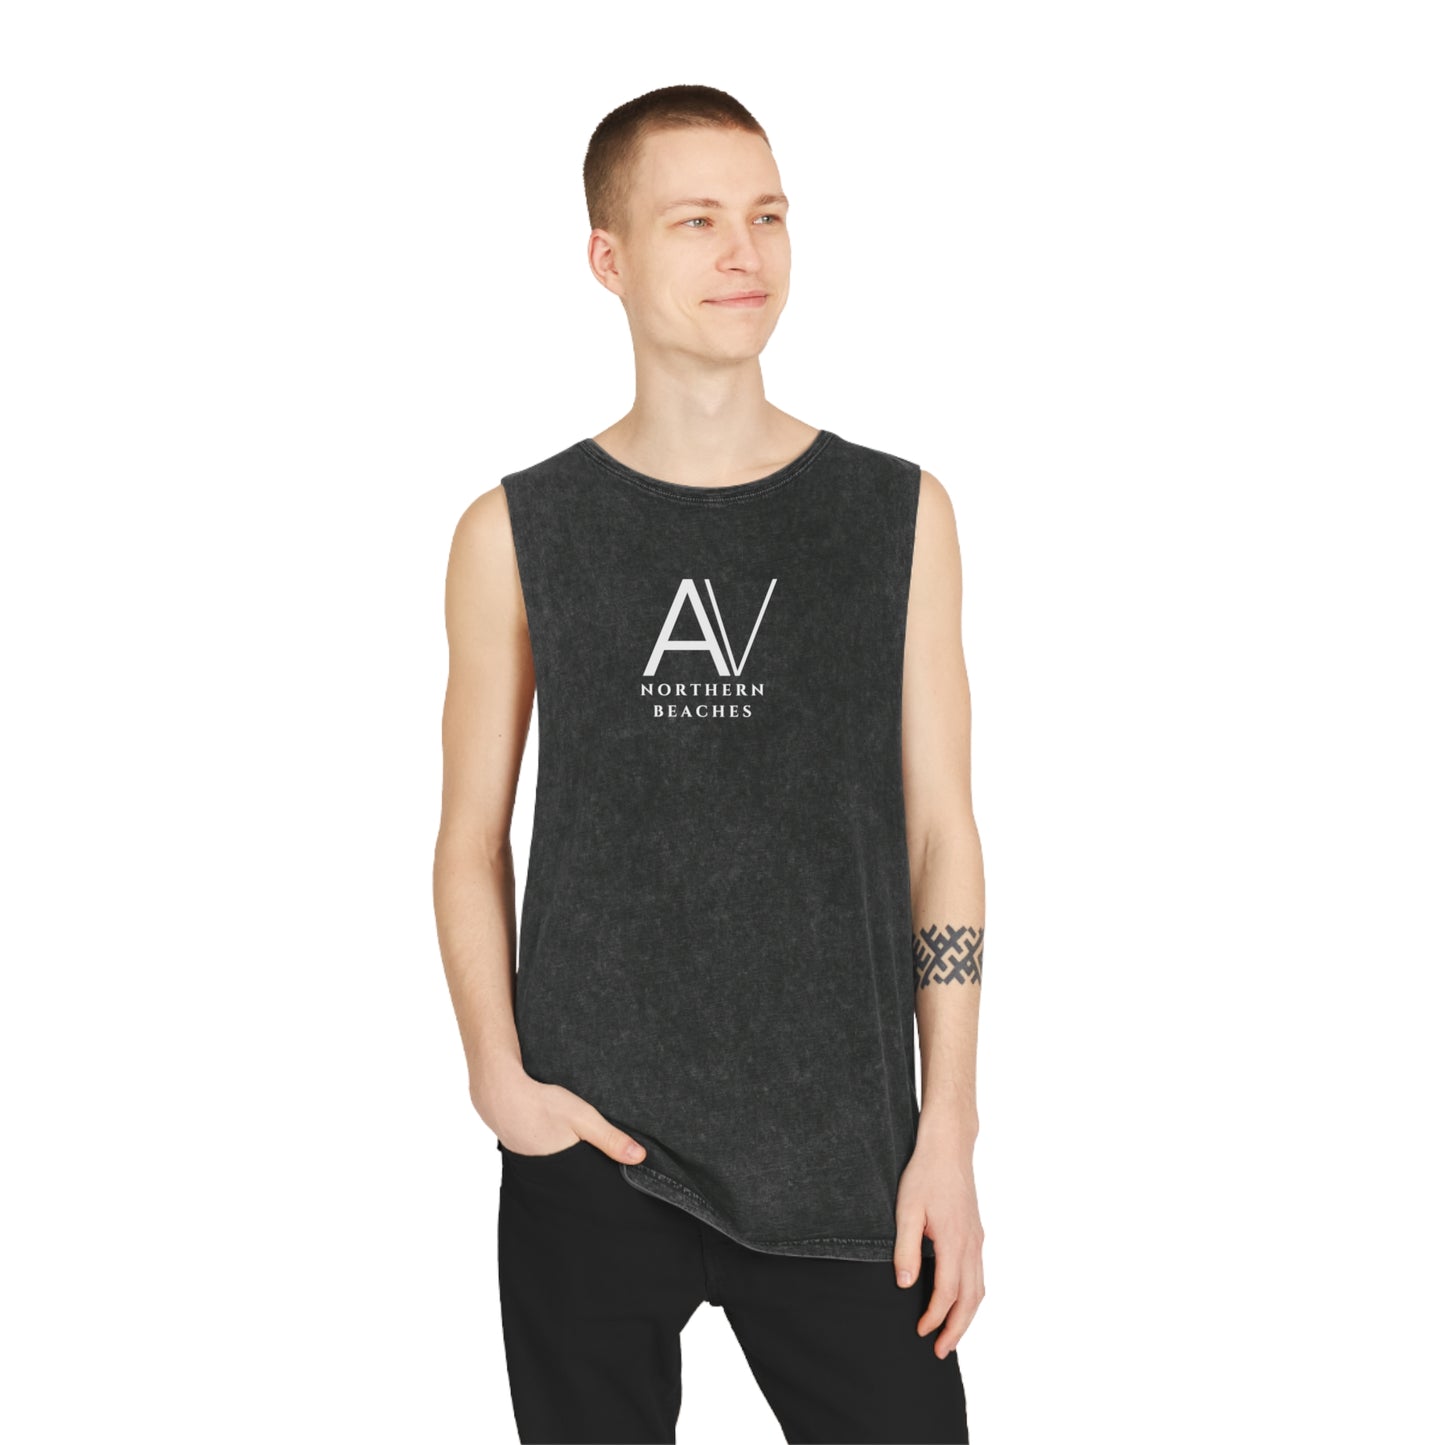 Stonewash Tank Top with Northern Beaches logo designs made to order